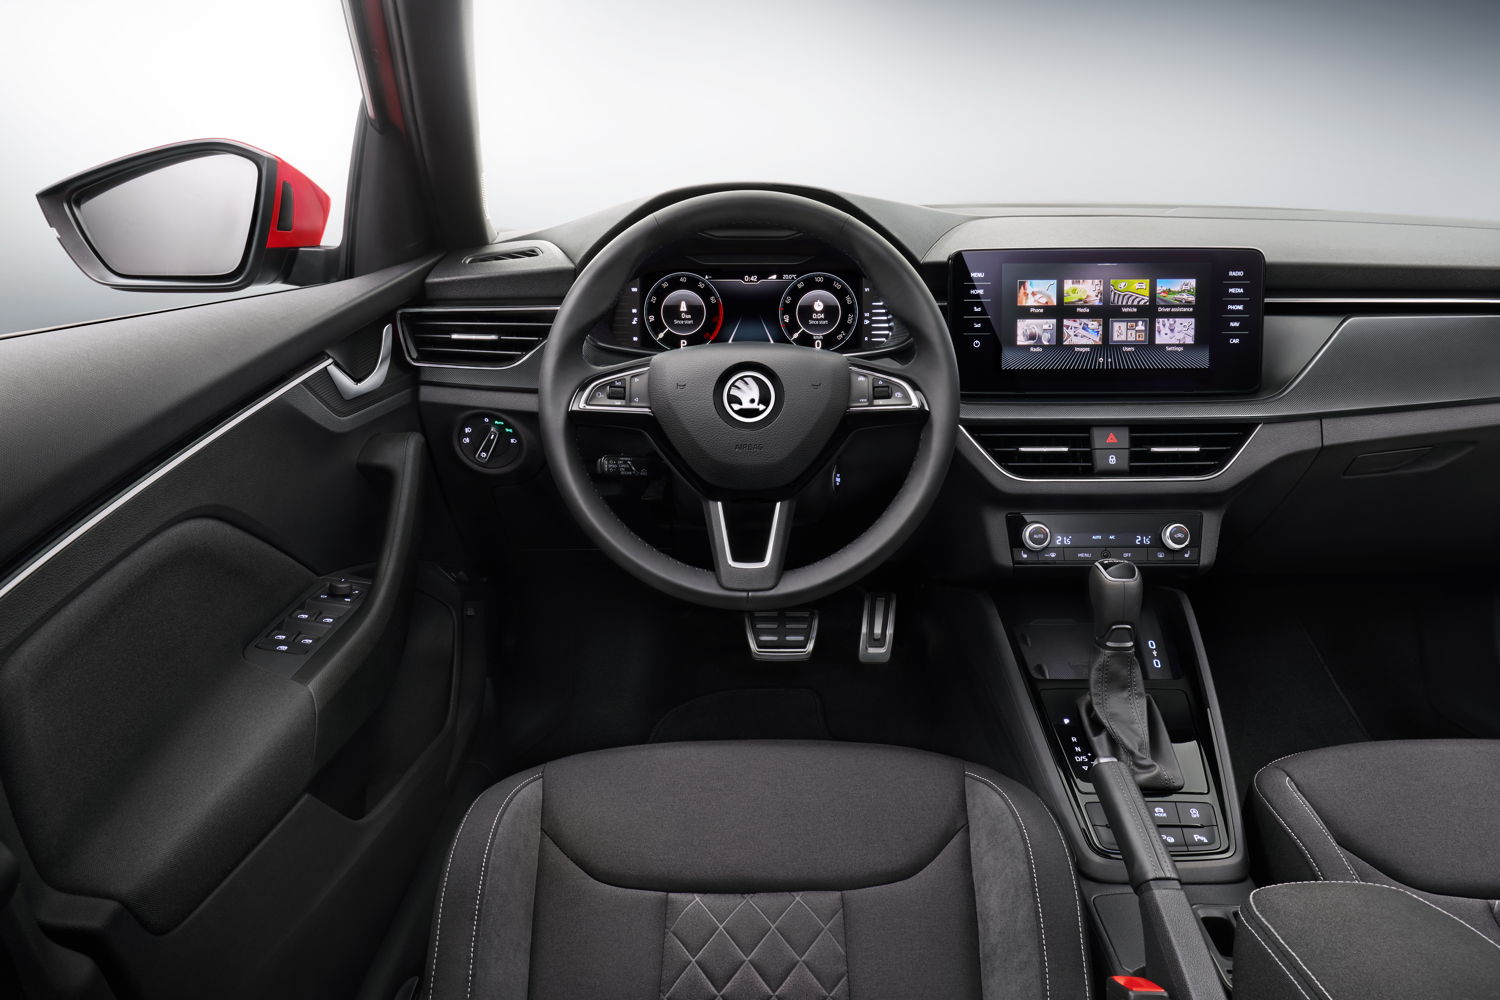 Three infotainment systems are available for the new ŠKODA KAMIQ. The top-of-the-range Amundsen infotainment system comes with a free-standing 9.2-inch touchscreen that is positioned up high, in clear view of the driver. This screen ranks amongst the largest within the segment.